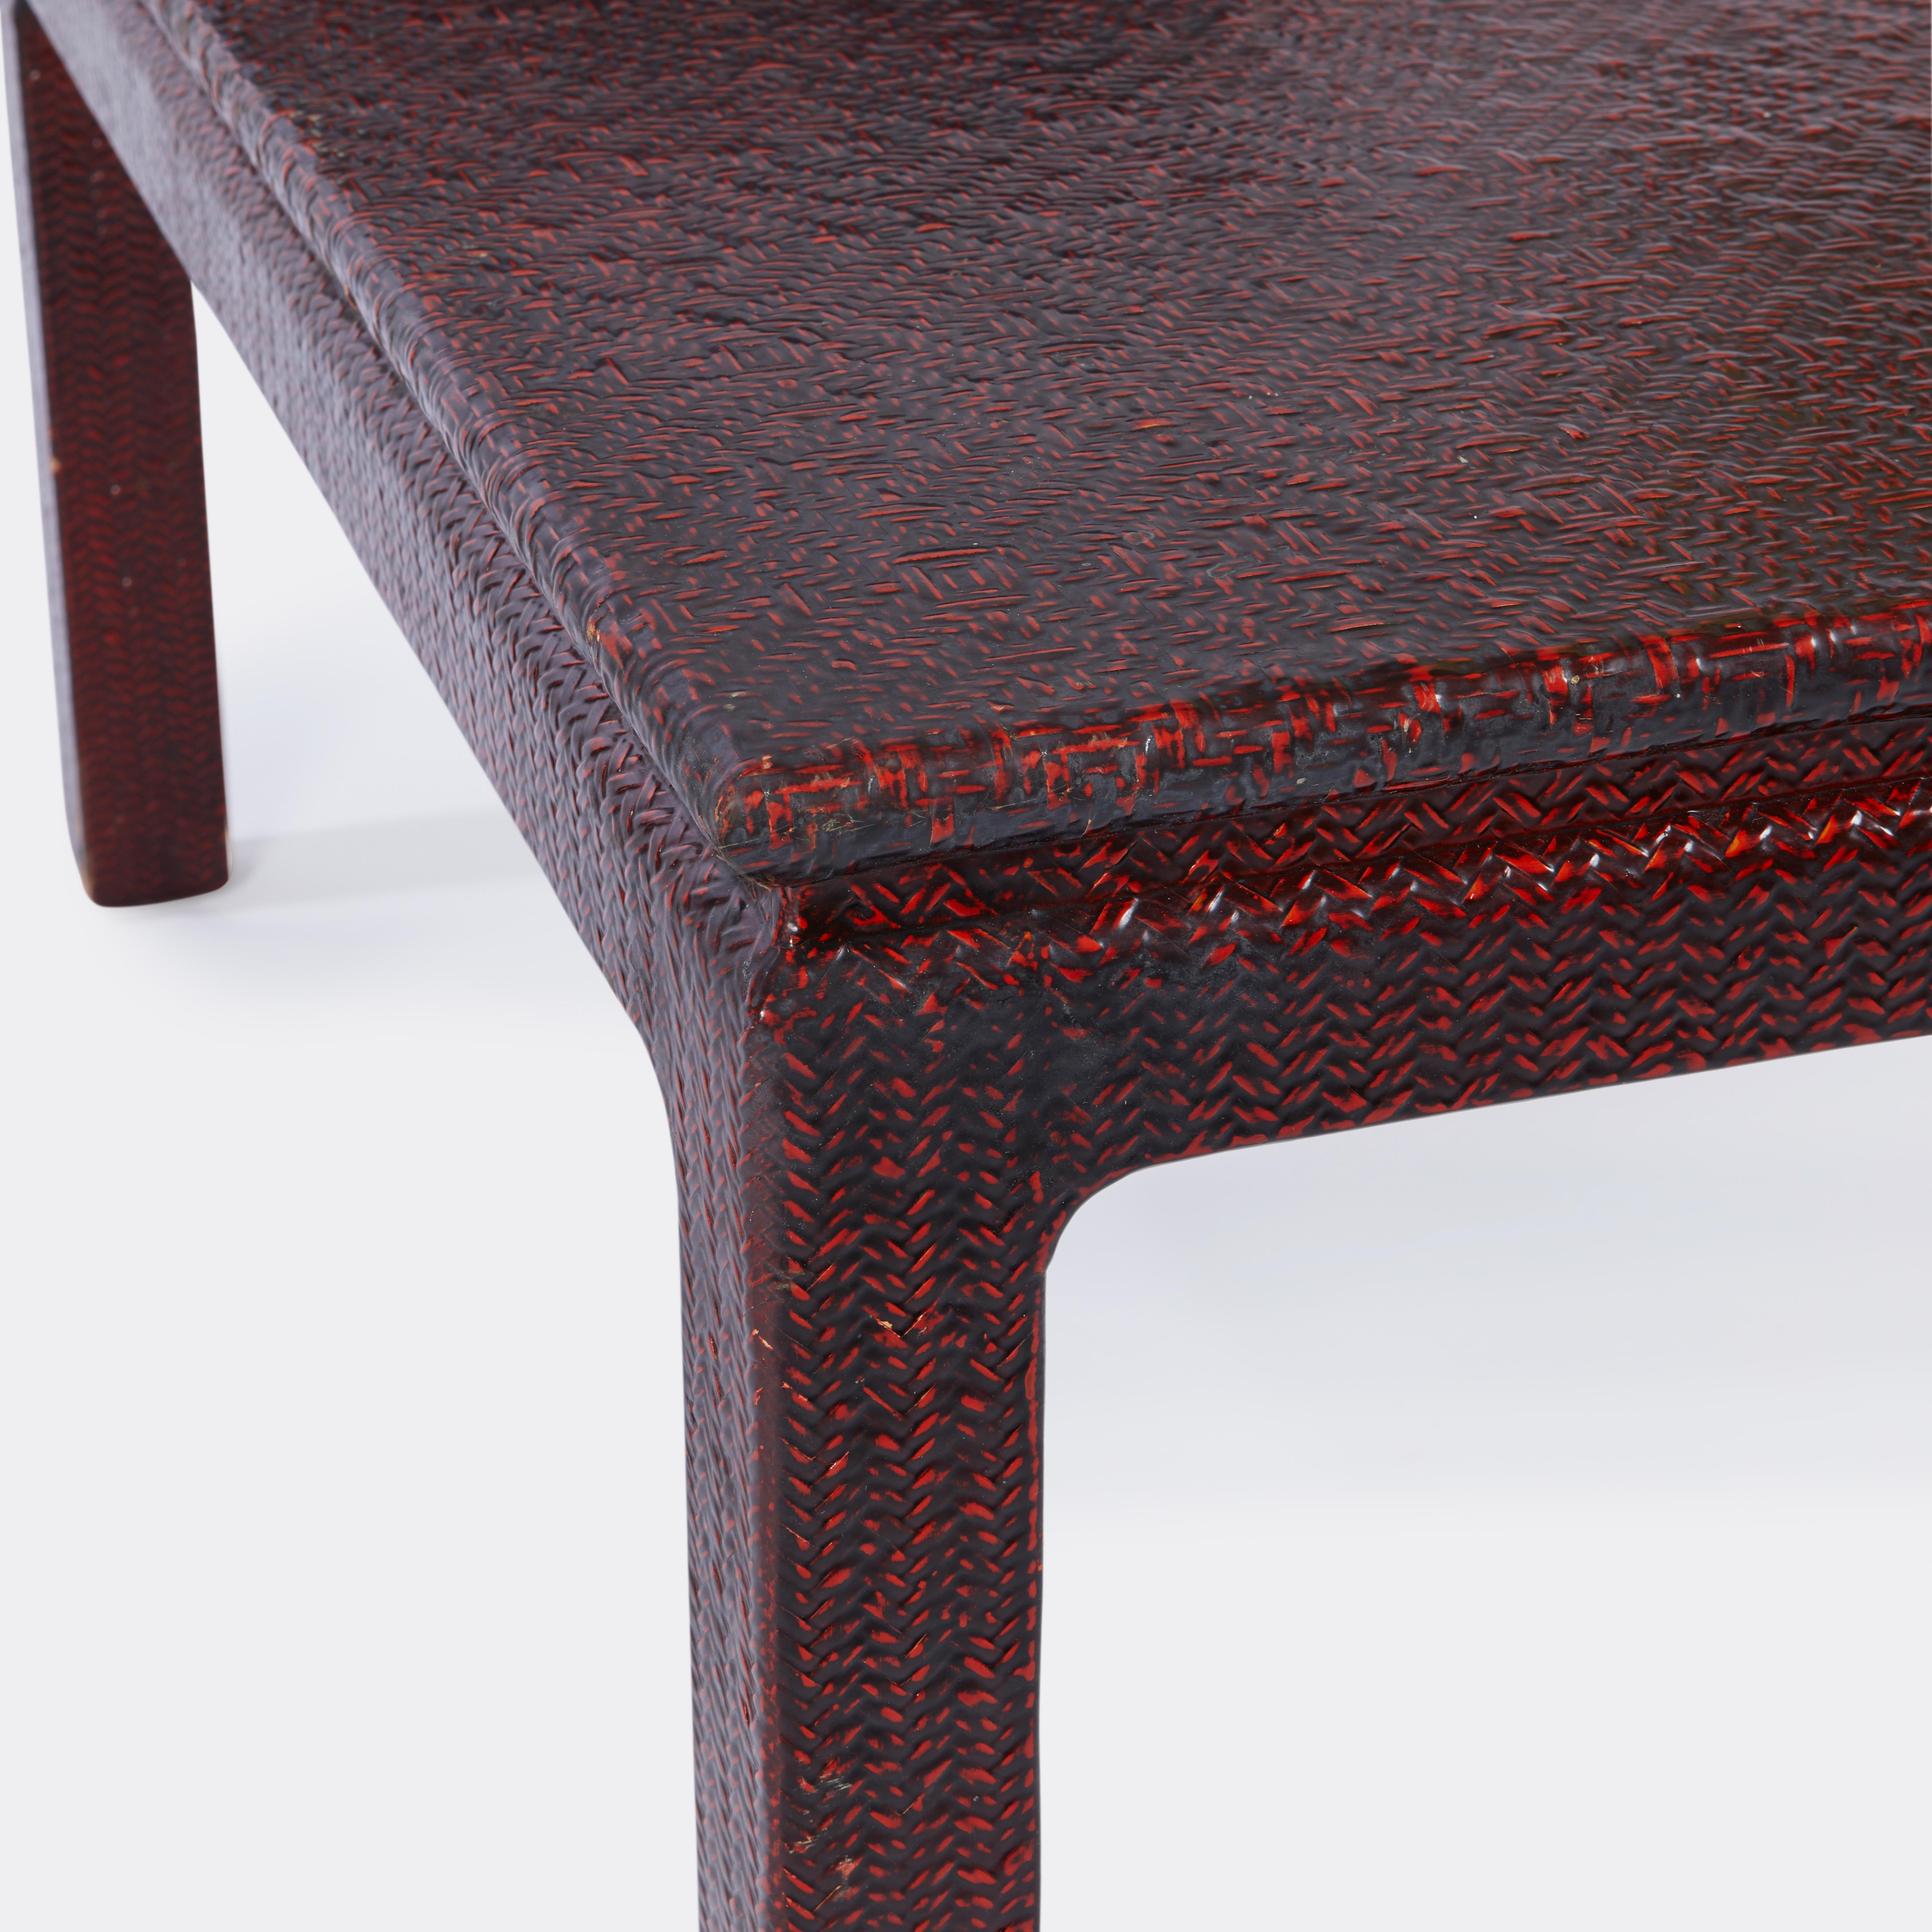 An American Karl Springer style red raffia lacquered coffee table with waterfall ends having red painted finish.